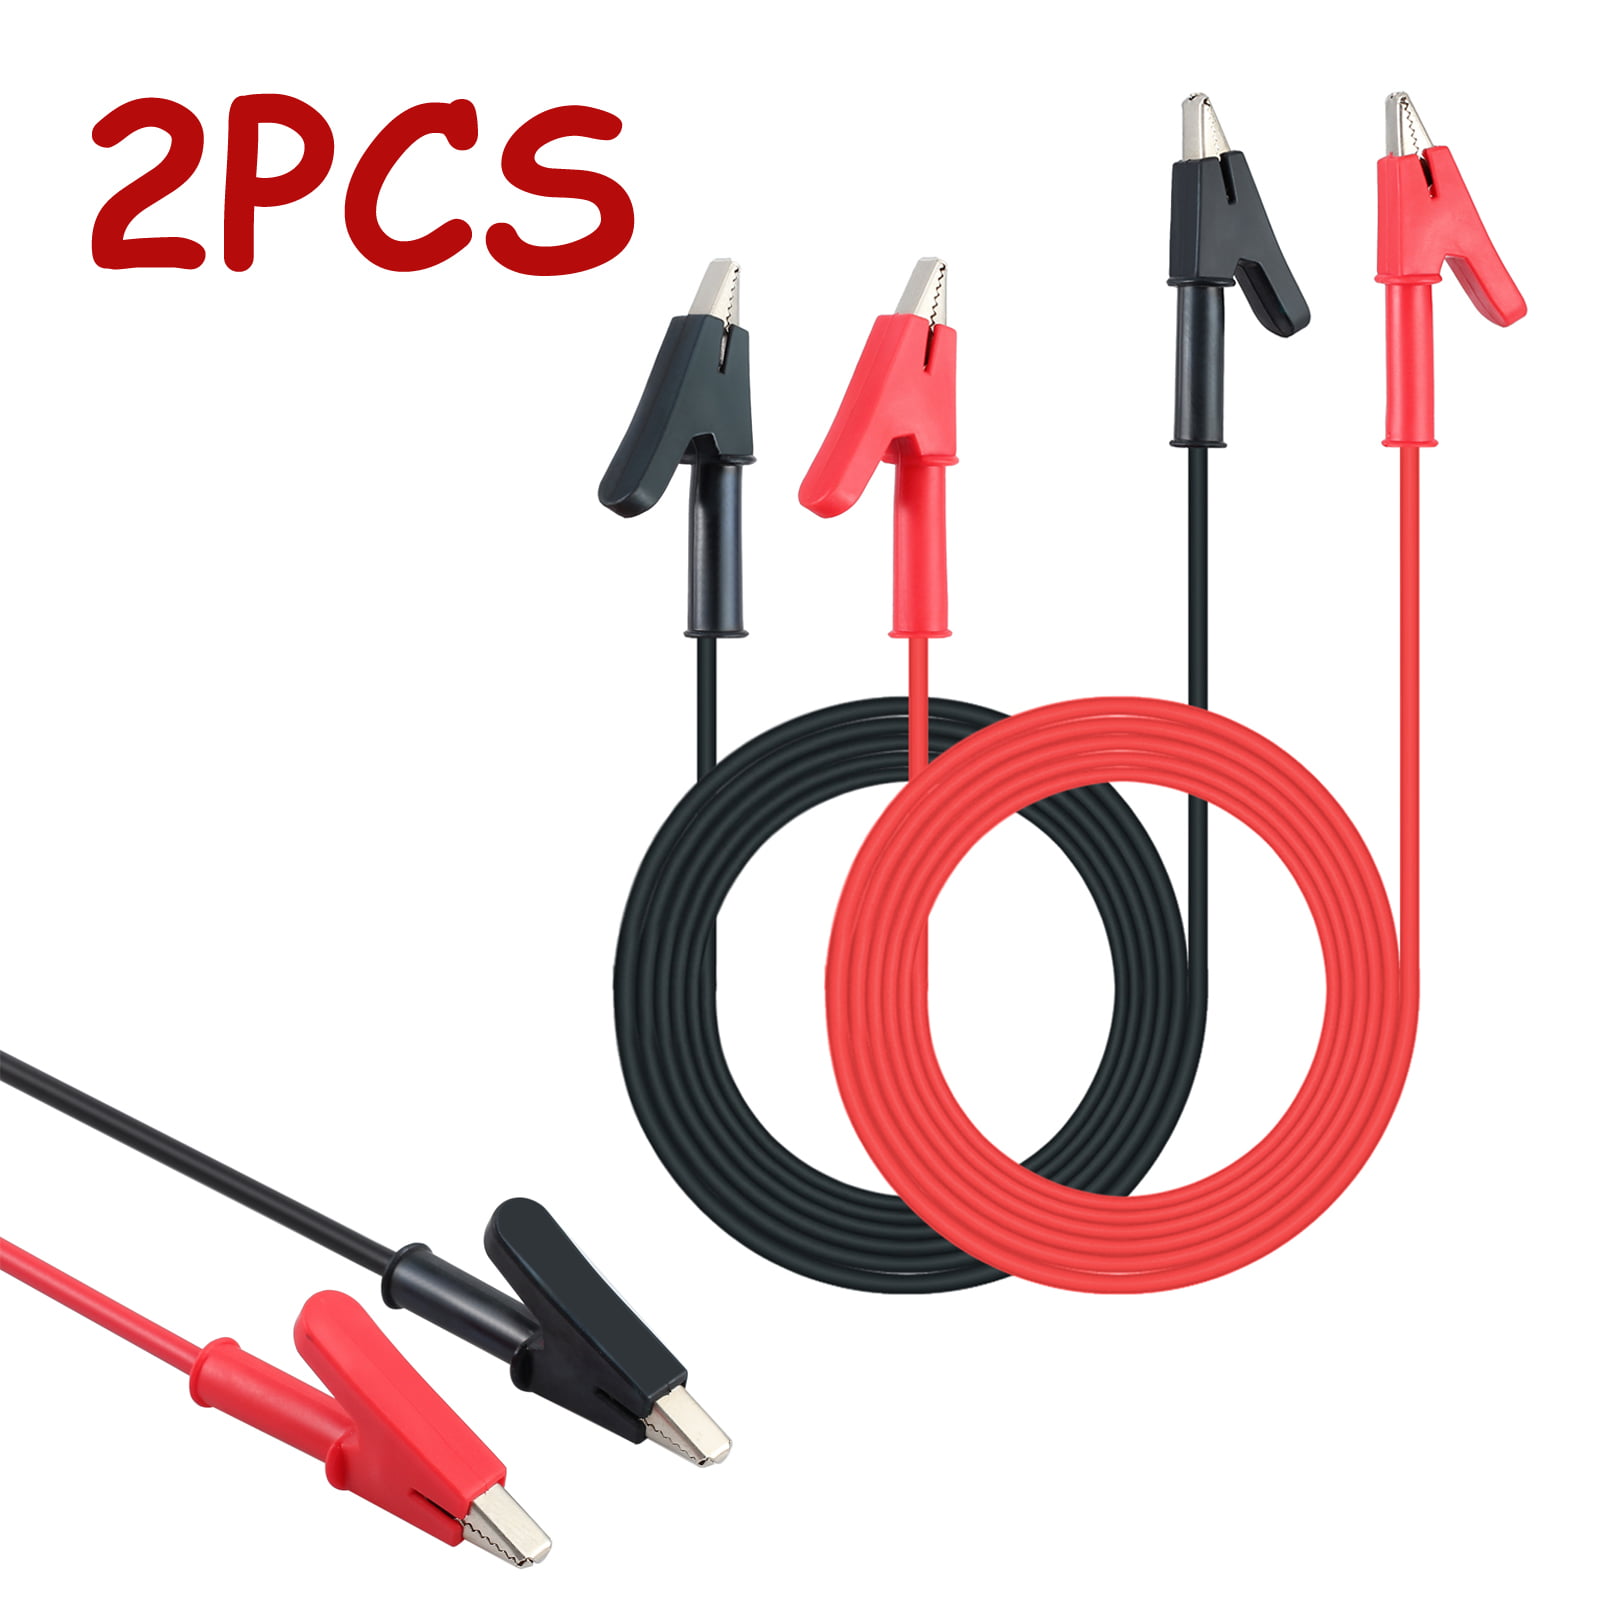 8pcs Double ended Red Black Clip Cable Wire Test Lead for Testing Probe Meter 